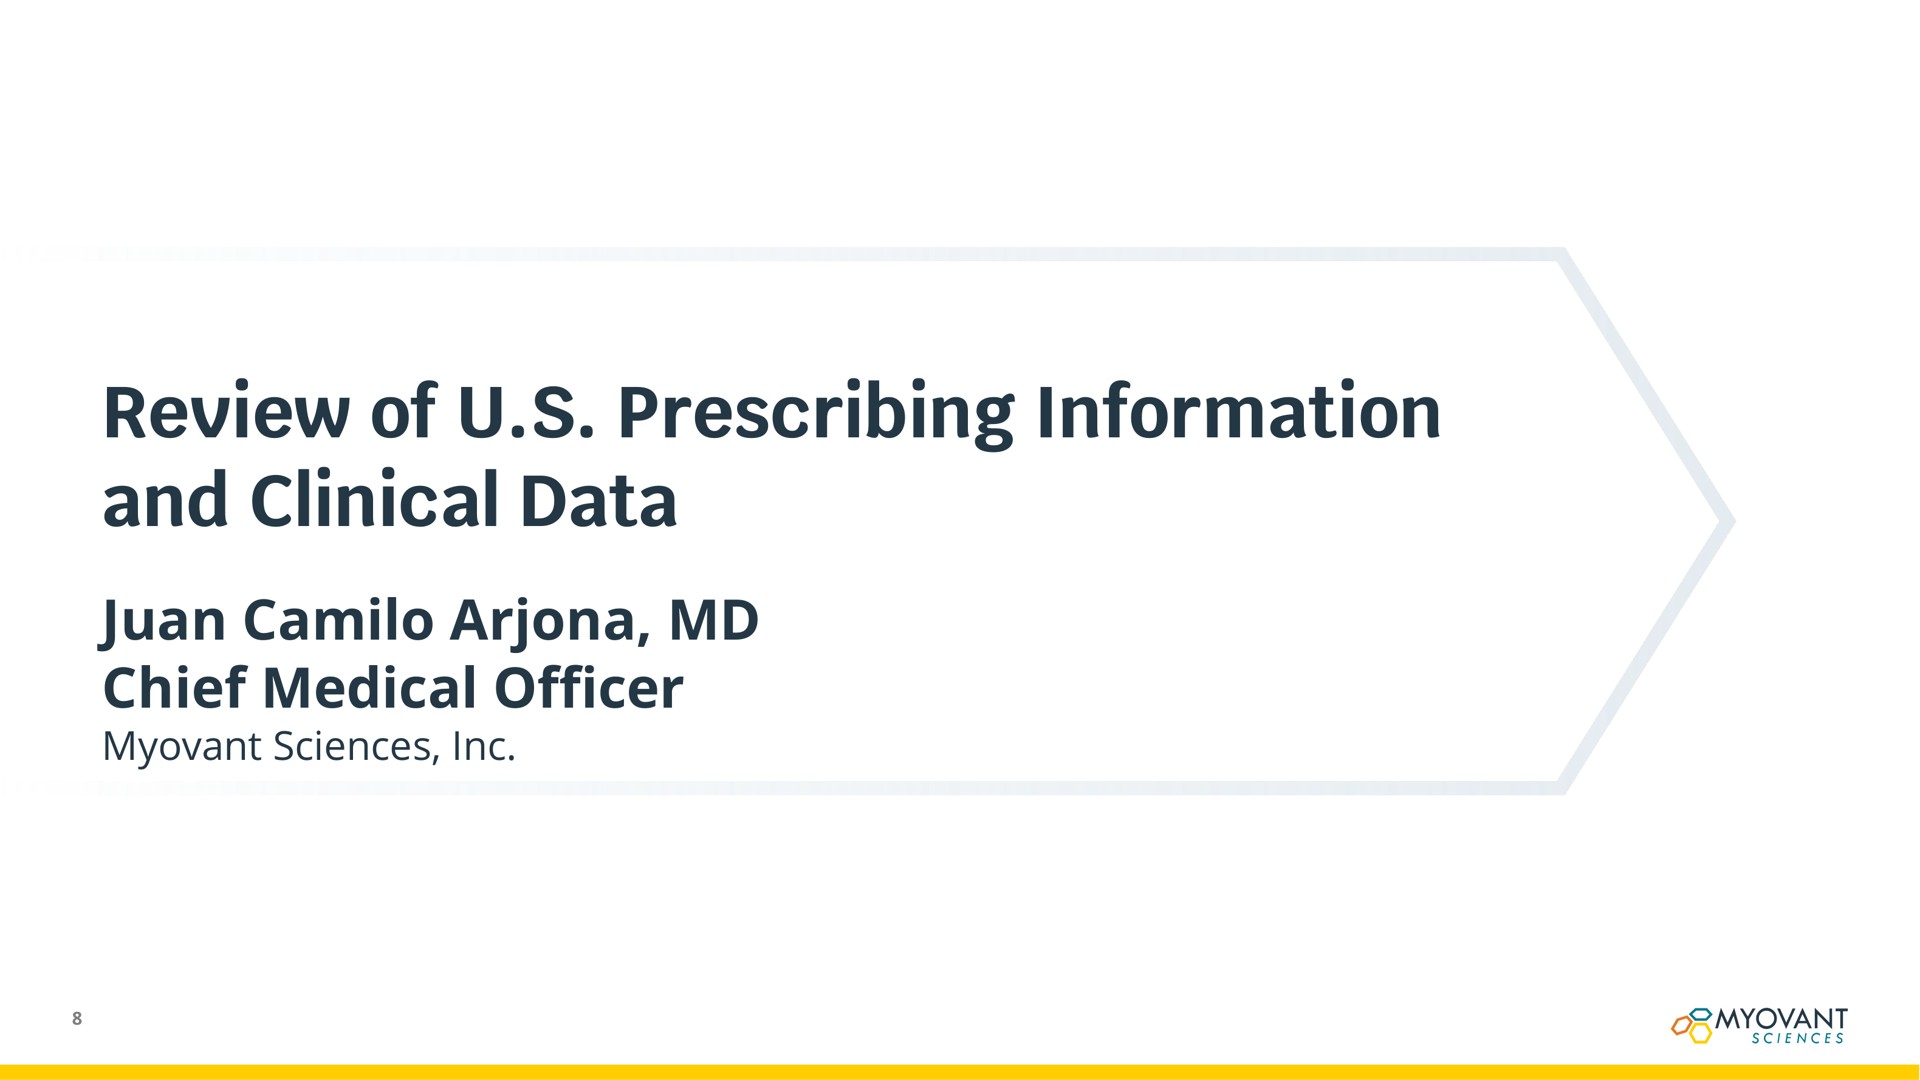 review of prescribing information and clinical data | Myovant Sciences